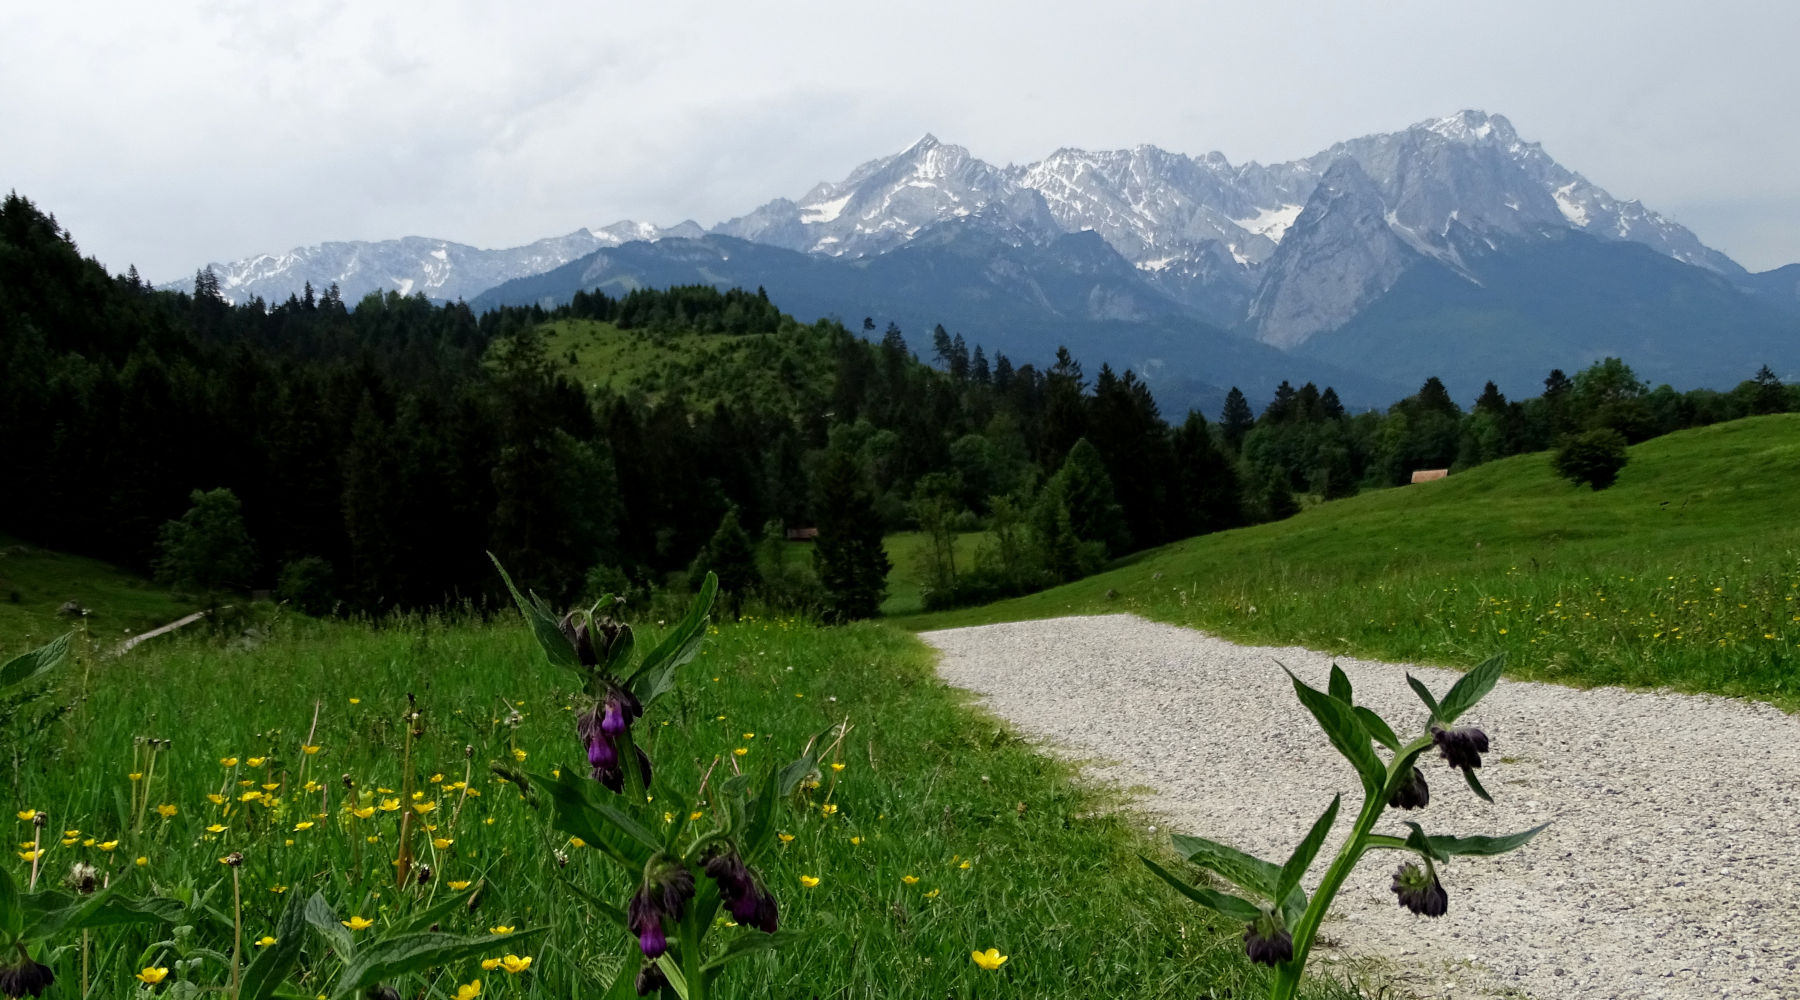 Badersee Blog: Hiking the Philosophers' Trail from Farchant to Garmisch-Partenkirchen